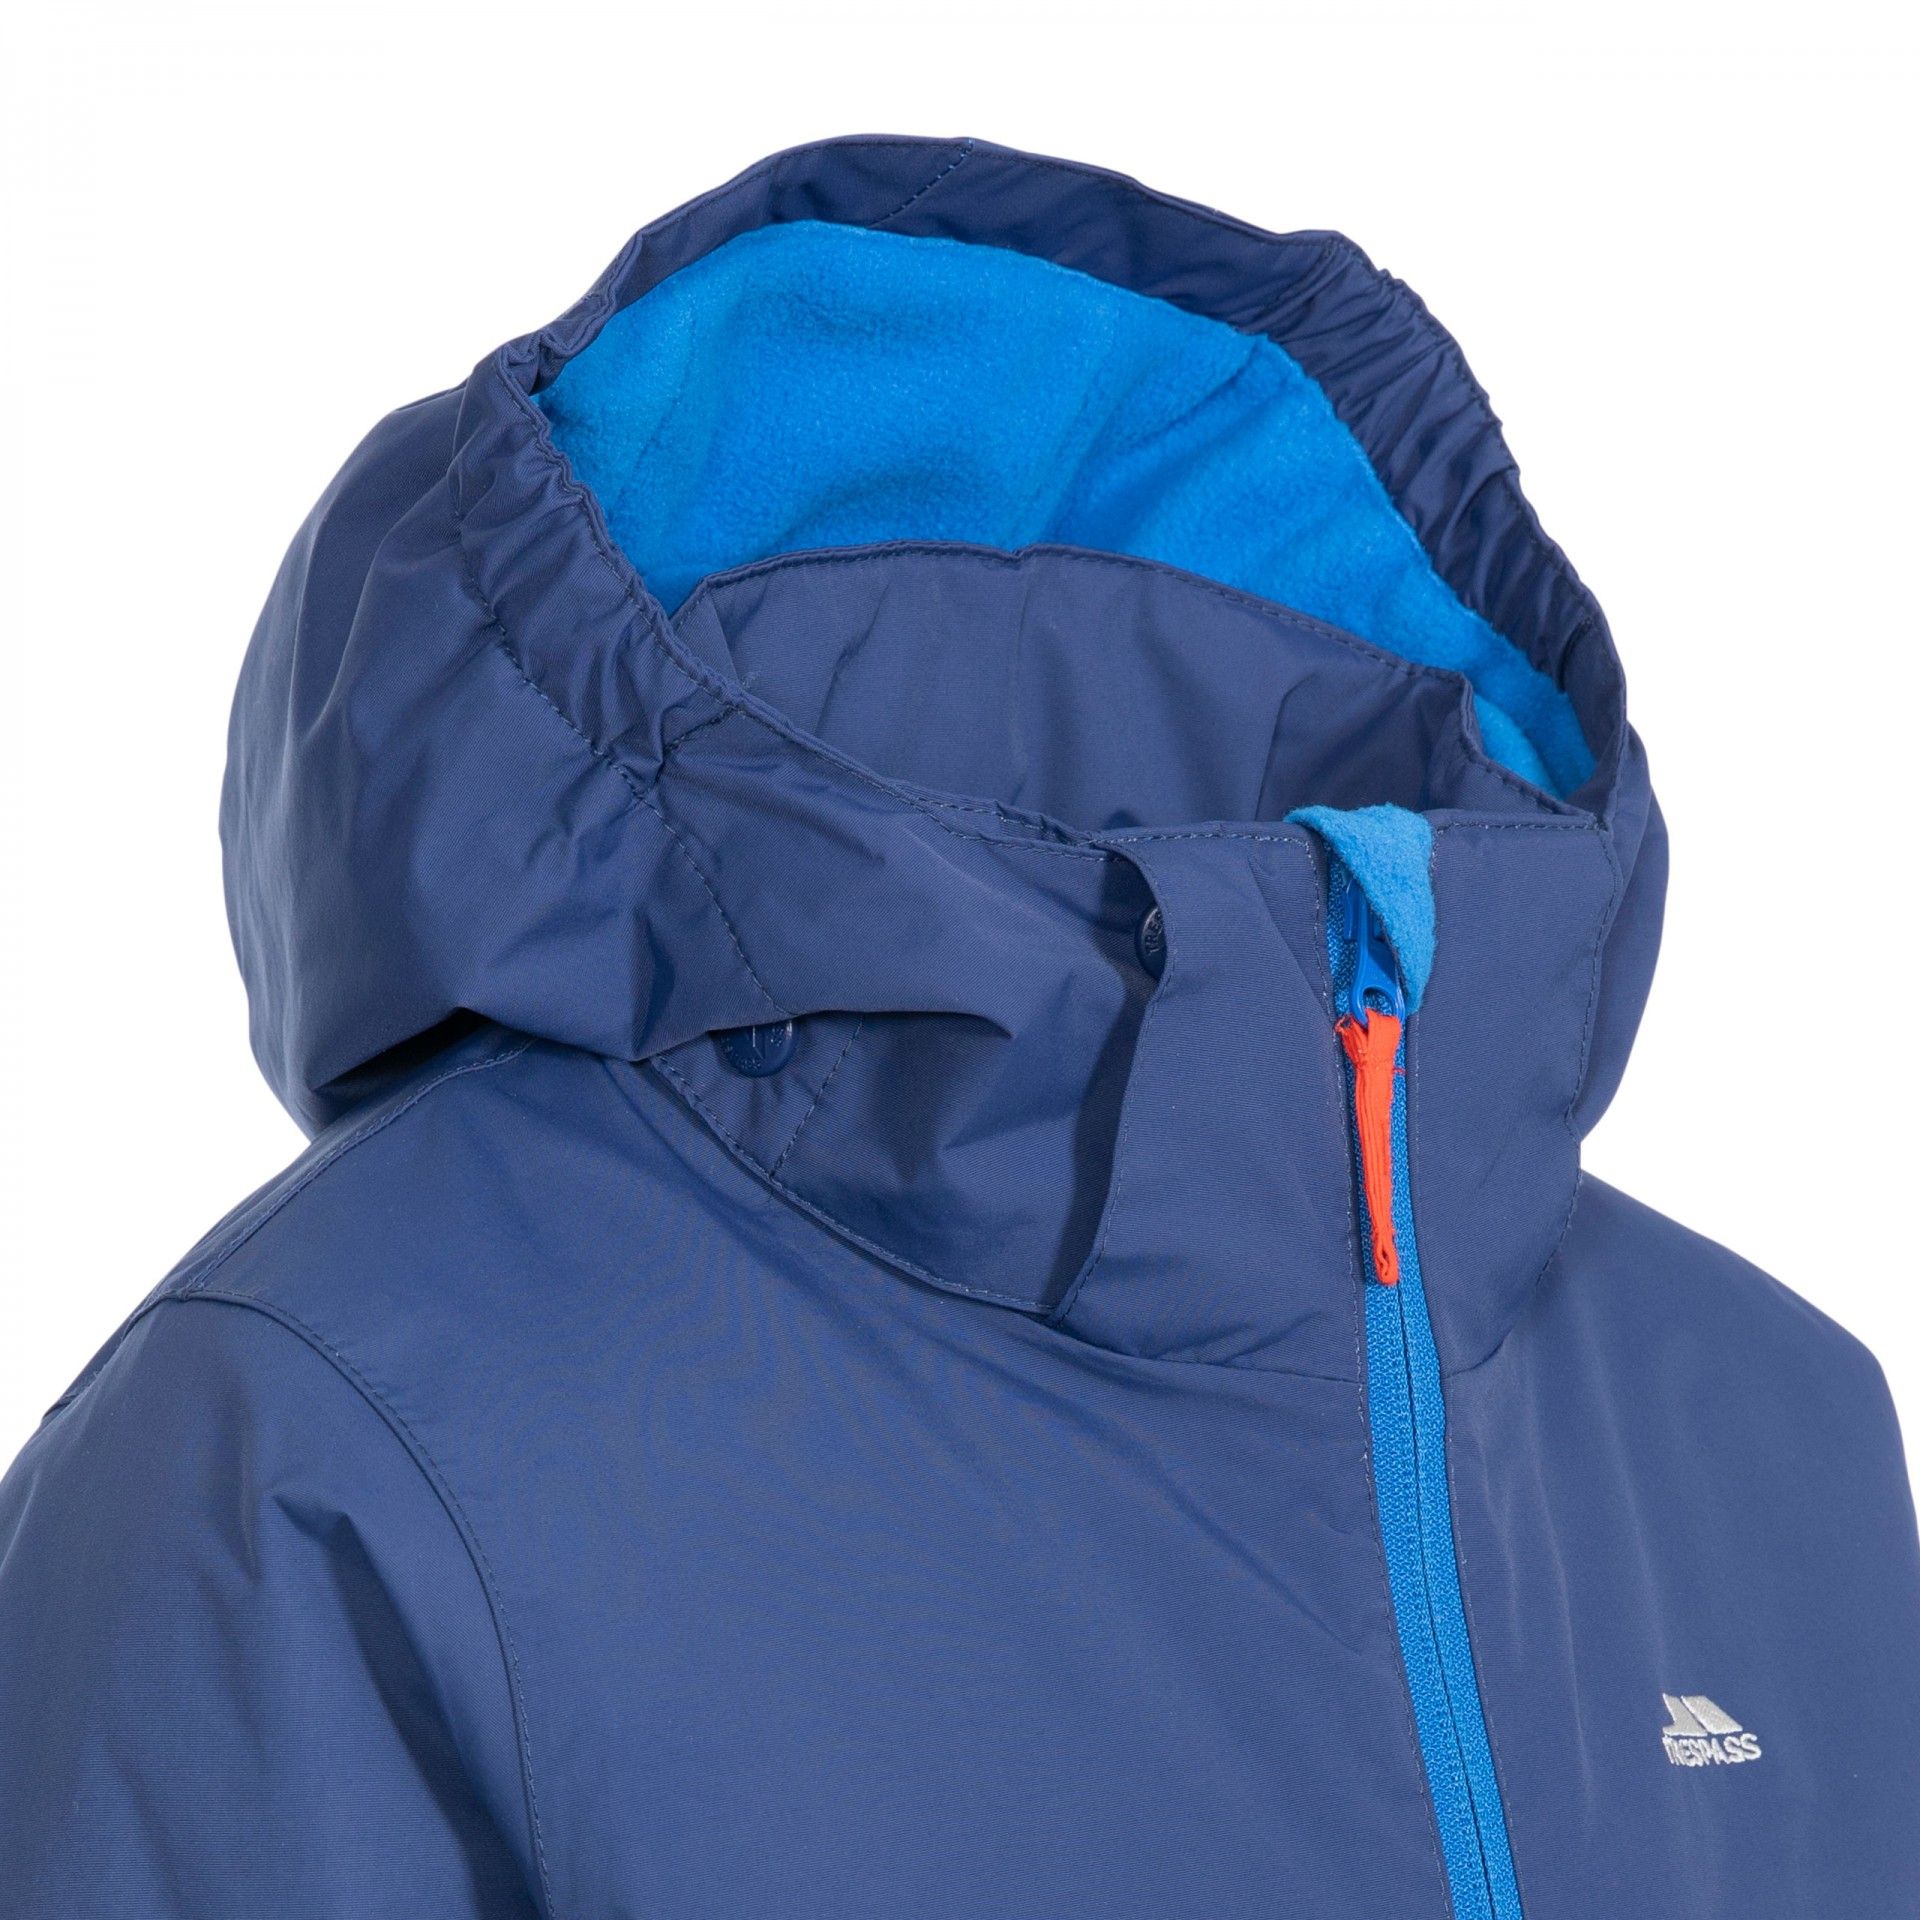 Material: 100% polyamide PU. Wato kids` ski jackets are expertly woven with a padded shell and feature a detachable hood. It also features a full zip front fastening, long sleeves with adjustable touch fastening cuffs, a zip pocket at the sleeve, 2 lower zip pockets and an inner snowskirt. The ski jacket boasts expert coldheat technology, 5000mm of waterproof protection, 5000mvp breathability and windproofing too. Height size to fit: (2-3 Yrs): 92-98cm, (3-4 Yrs): 98-104cm, (5-6 Yrs): 110-116cm, (7-8 Yrs): 122-128cm, (9-10 Yrs): 134-40cm, (11-12 Yrs): 146-152cm, (13-14 Yrs): 158-164cm, (15-16 Yrs): 170-176cm. Waist size to fit: (2-3 Yrs): 50.5cm, (3-4 Yrs): 53cm, (5-6 Yrs): 56cm, (7-8 Yrs): 58.5cm, (9-10 Yrs): 61cm, (11-12 Yrs): 66cm, (13-14 Yrs): 71cm, (15-16 Yrs): 73.5cm.